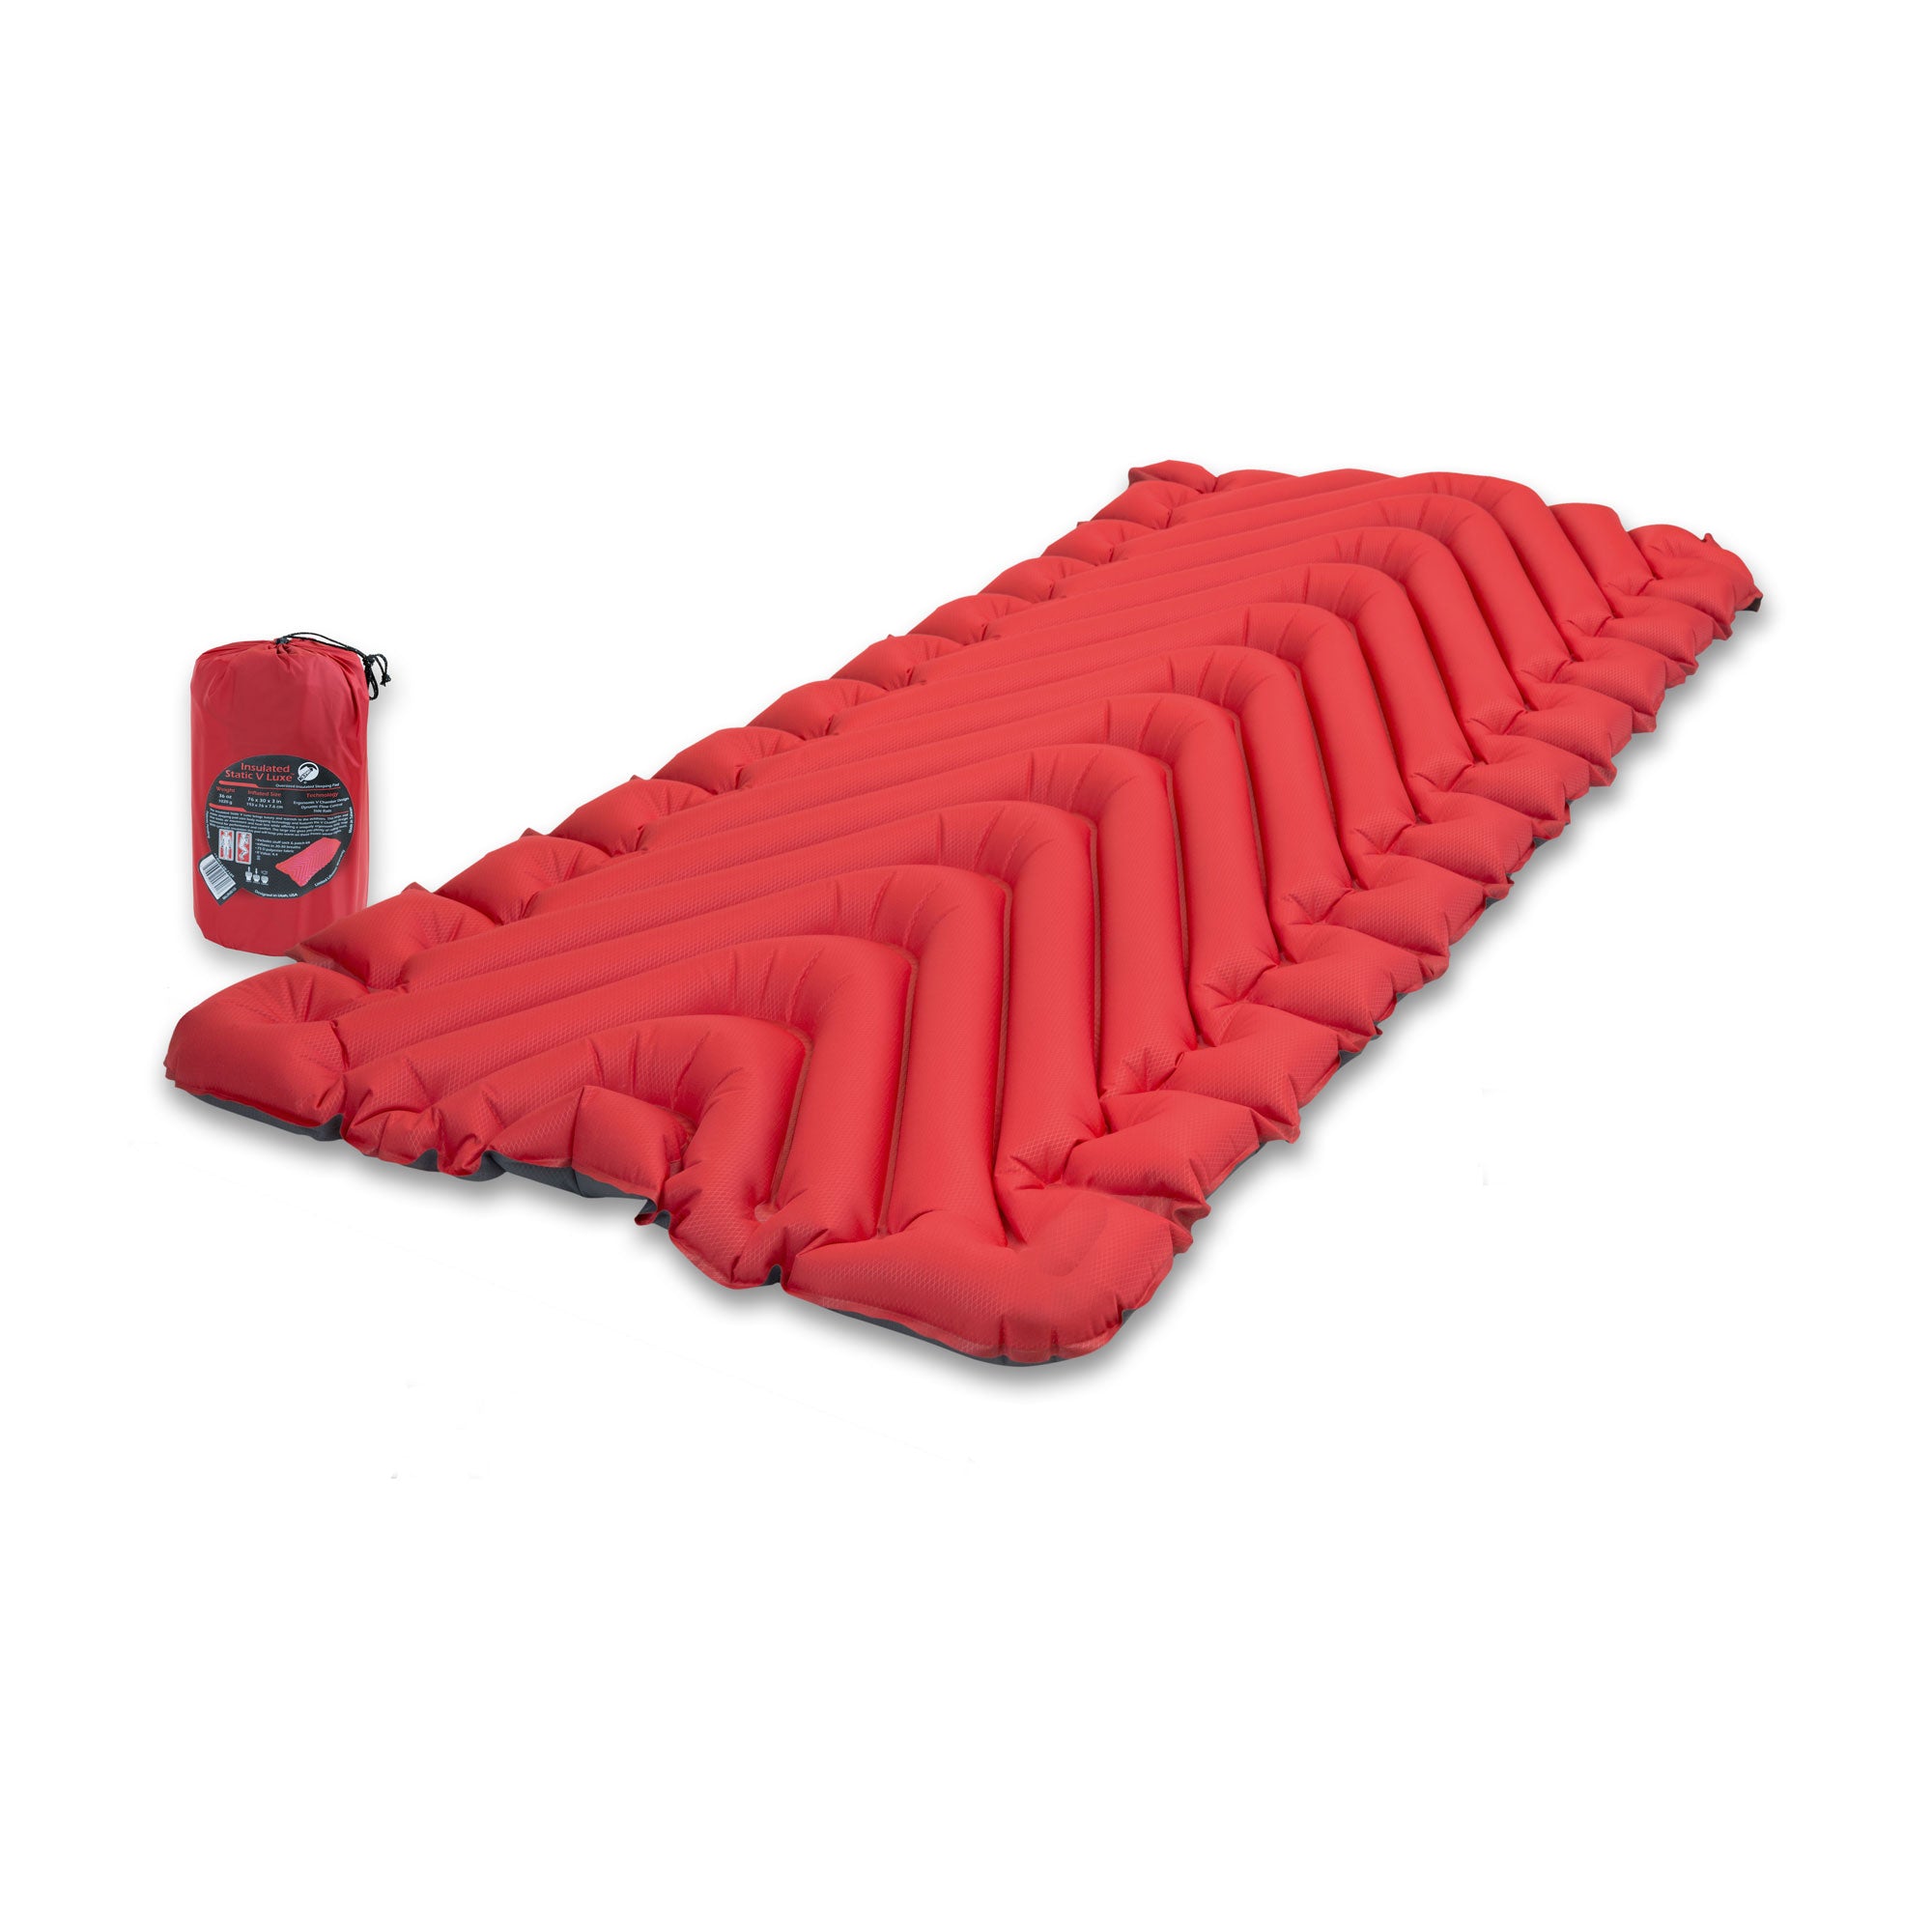 Insulated Static V Luxe™ Sleeping Pad